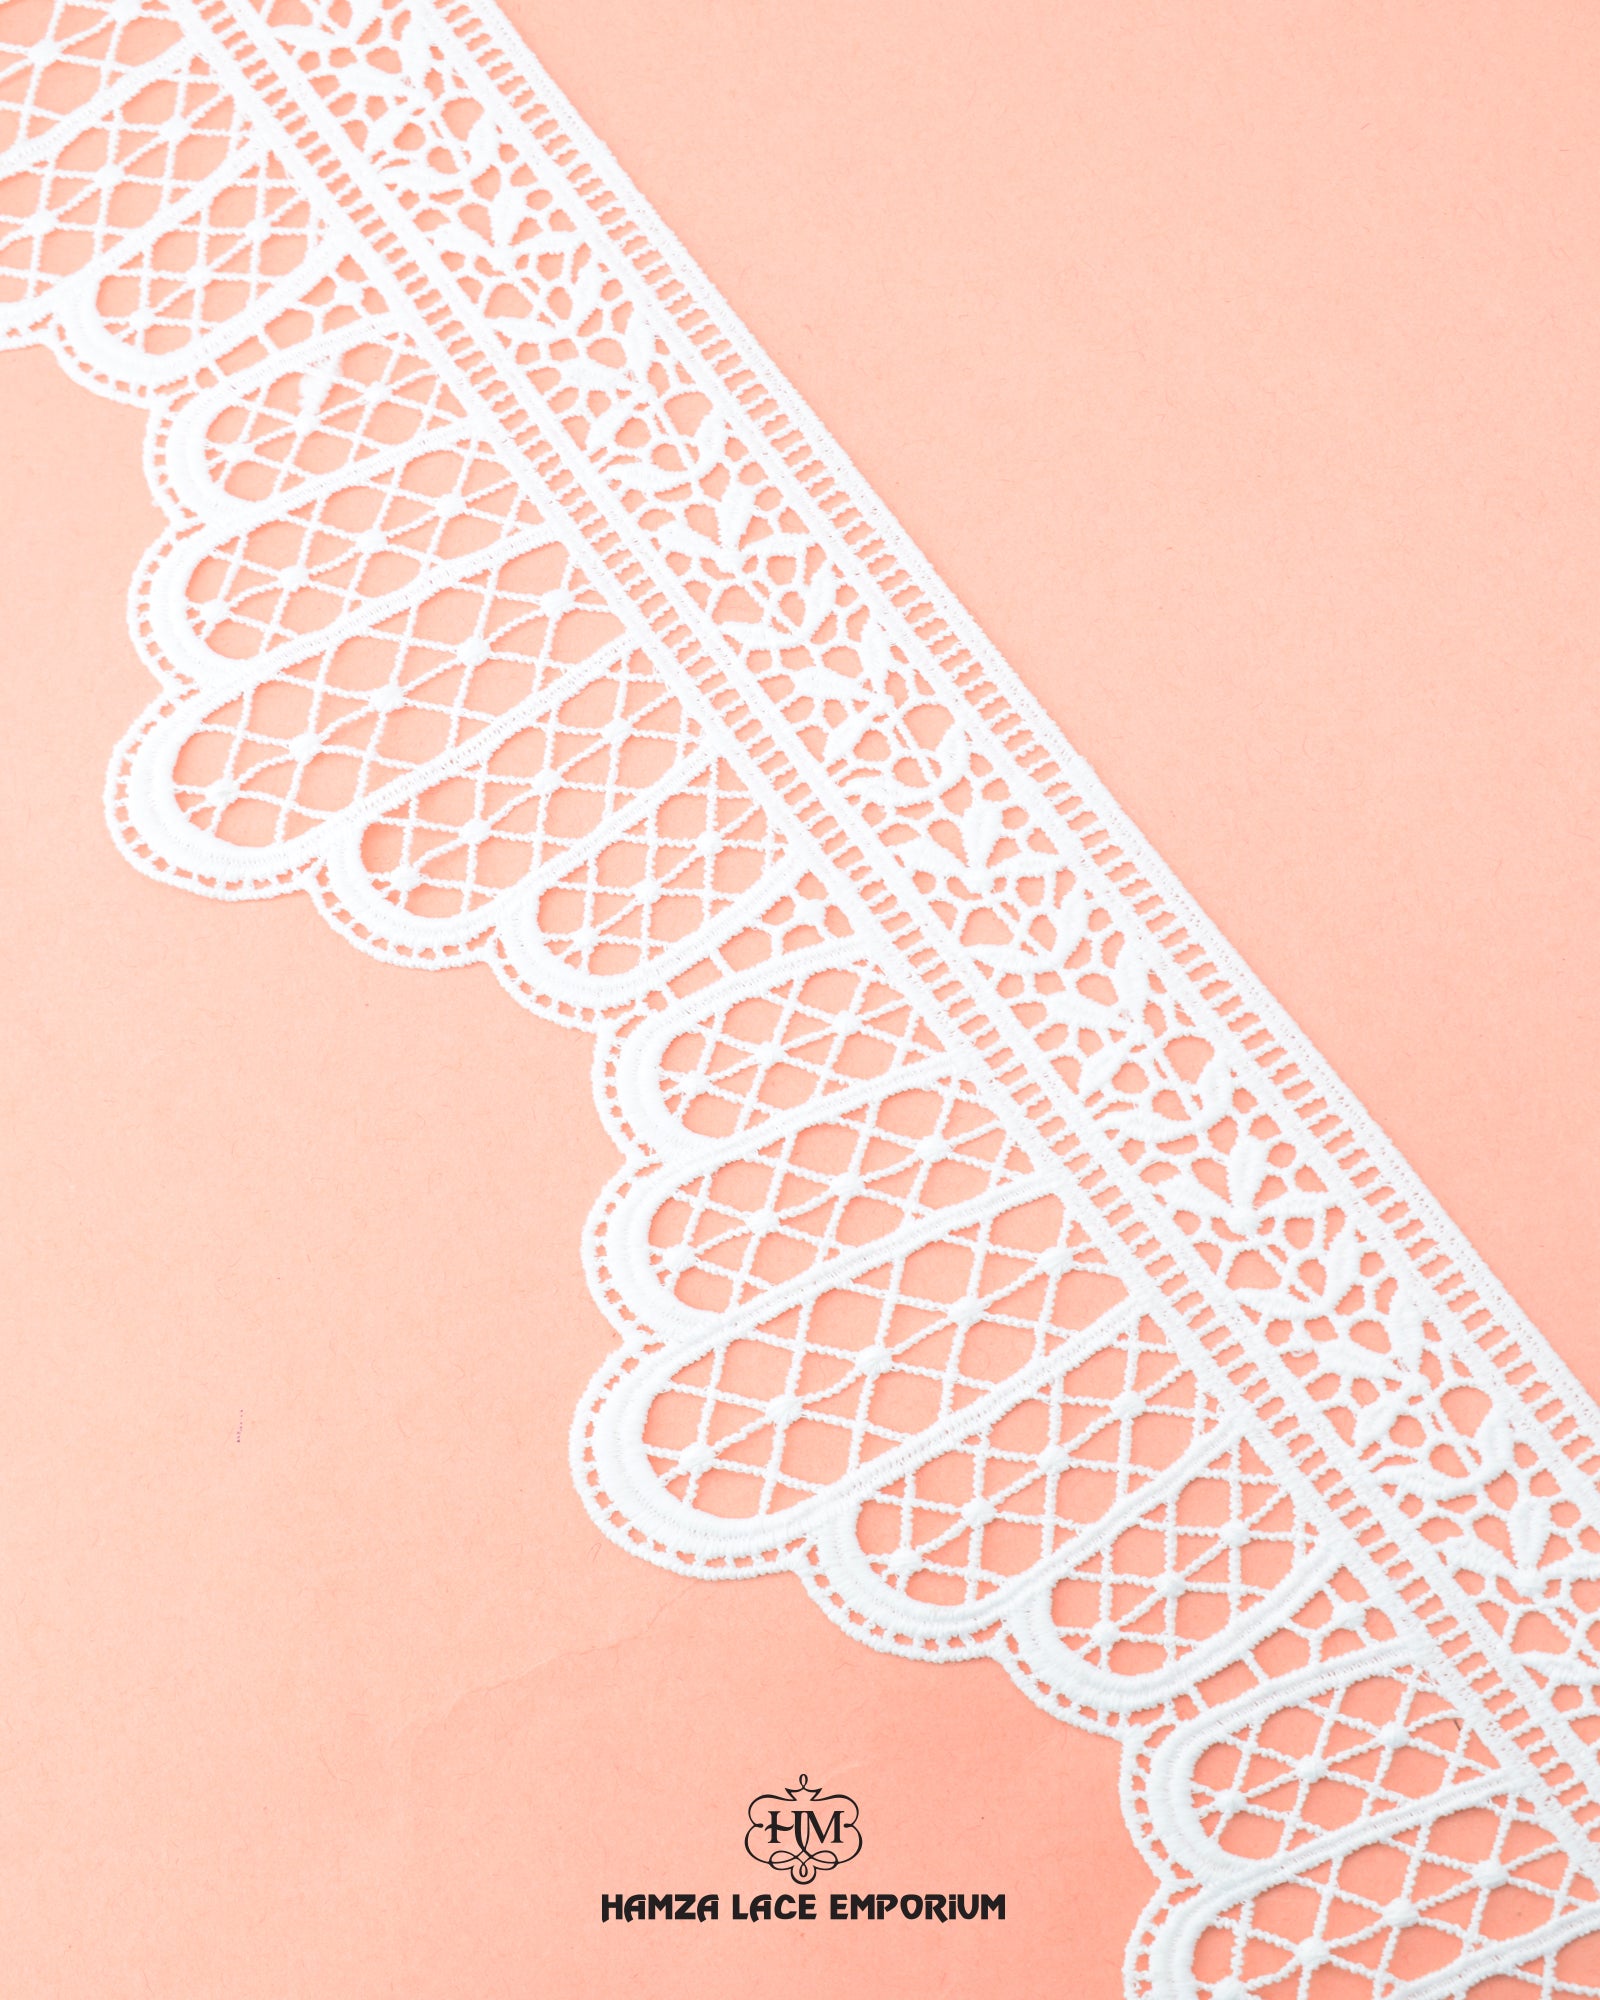 'Edging Loop Lace 17224' with the brand name 'Hamza Lace' at the bottom